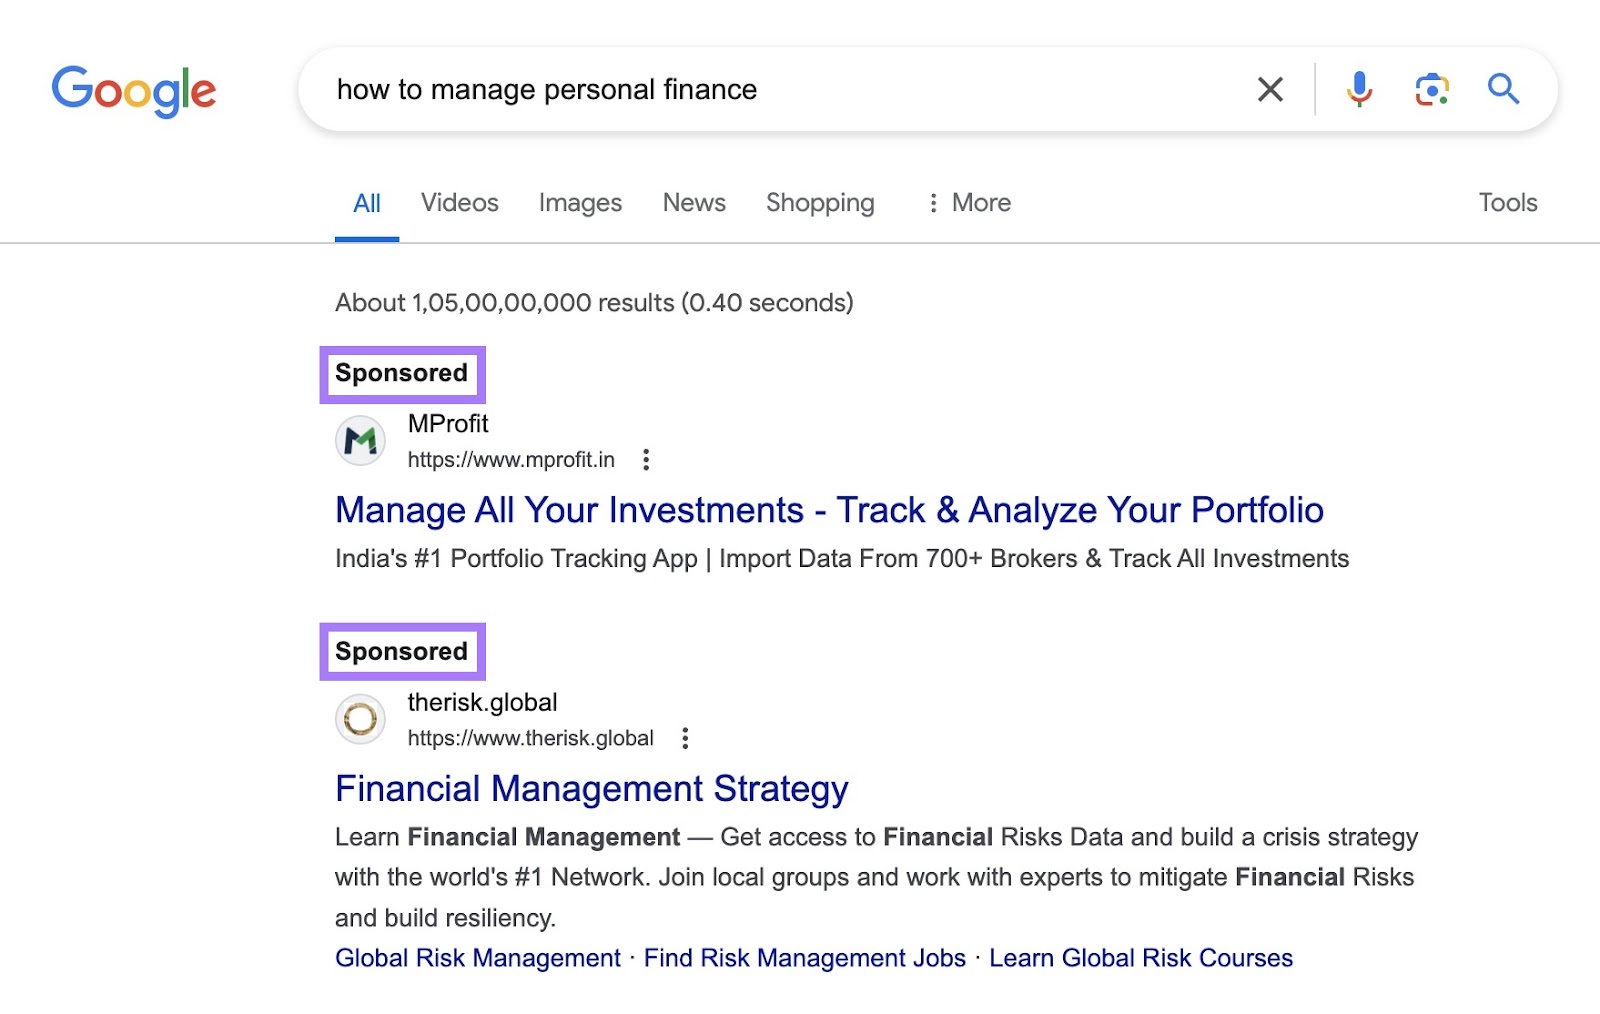 native ads on a Google search engine results page